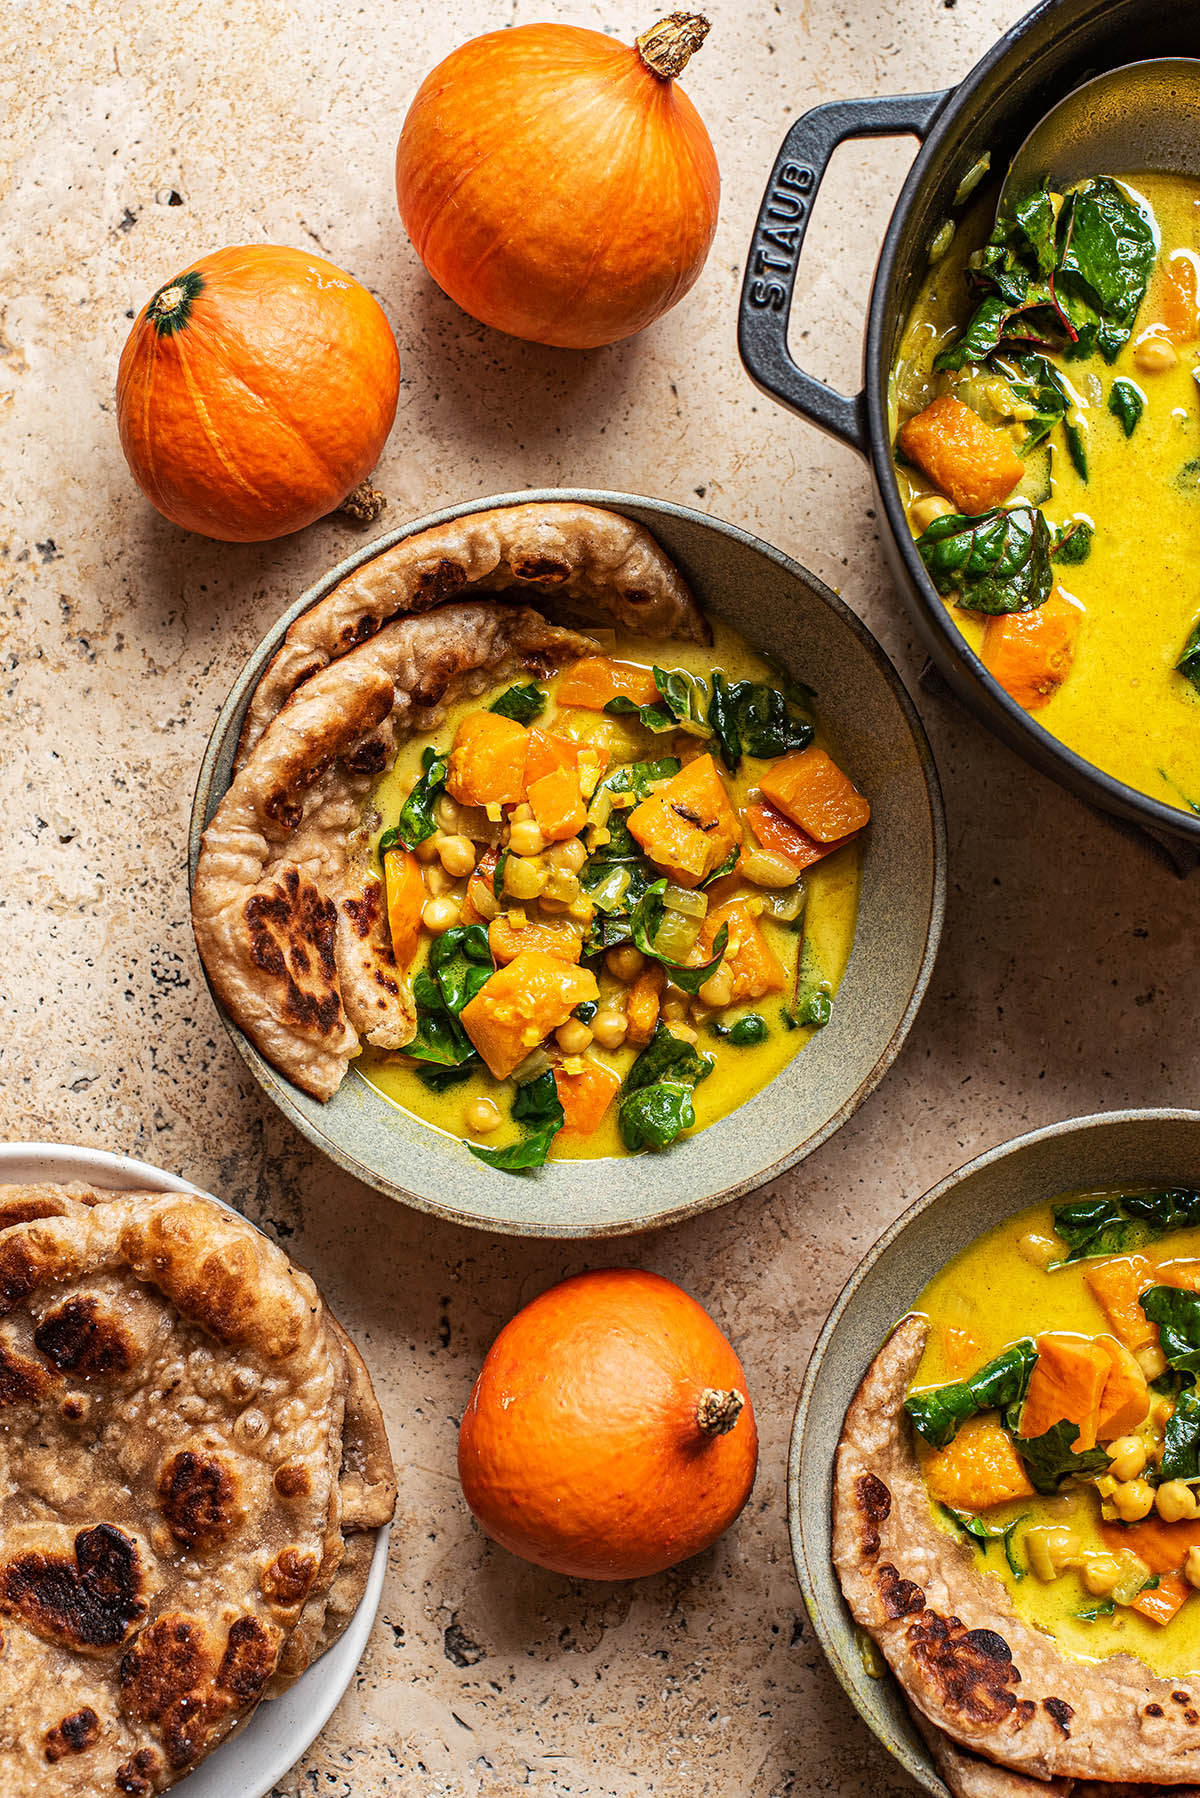 Bowls of pumpkin curry with naan.